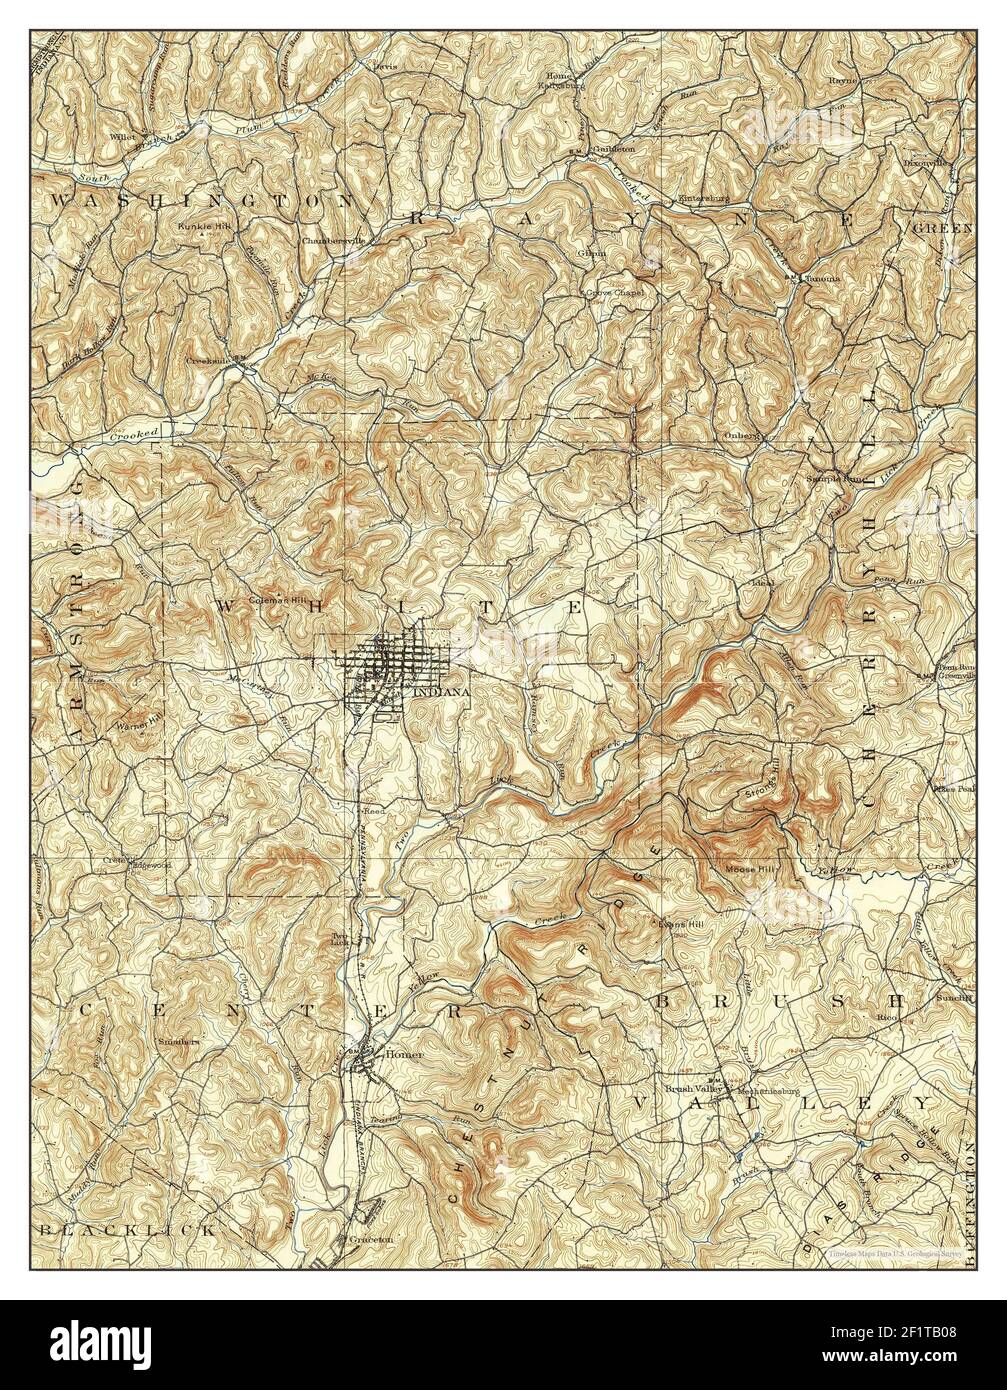 Indiana, Pennsylvania, map 1902, 1:62500, United States of America by Timeless Maps, data U.S. Geological Survey Stock Photo